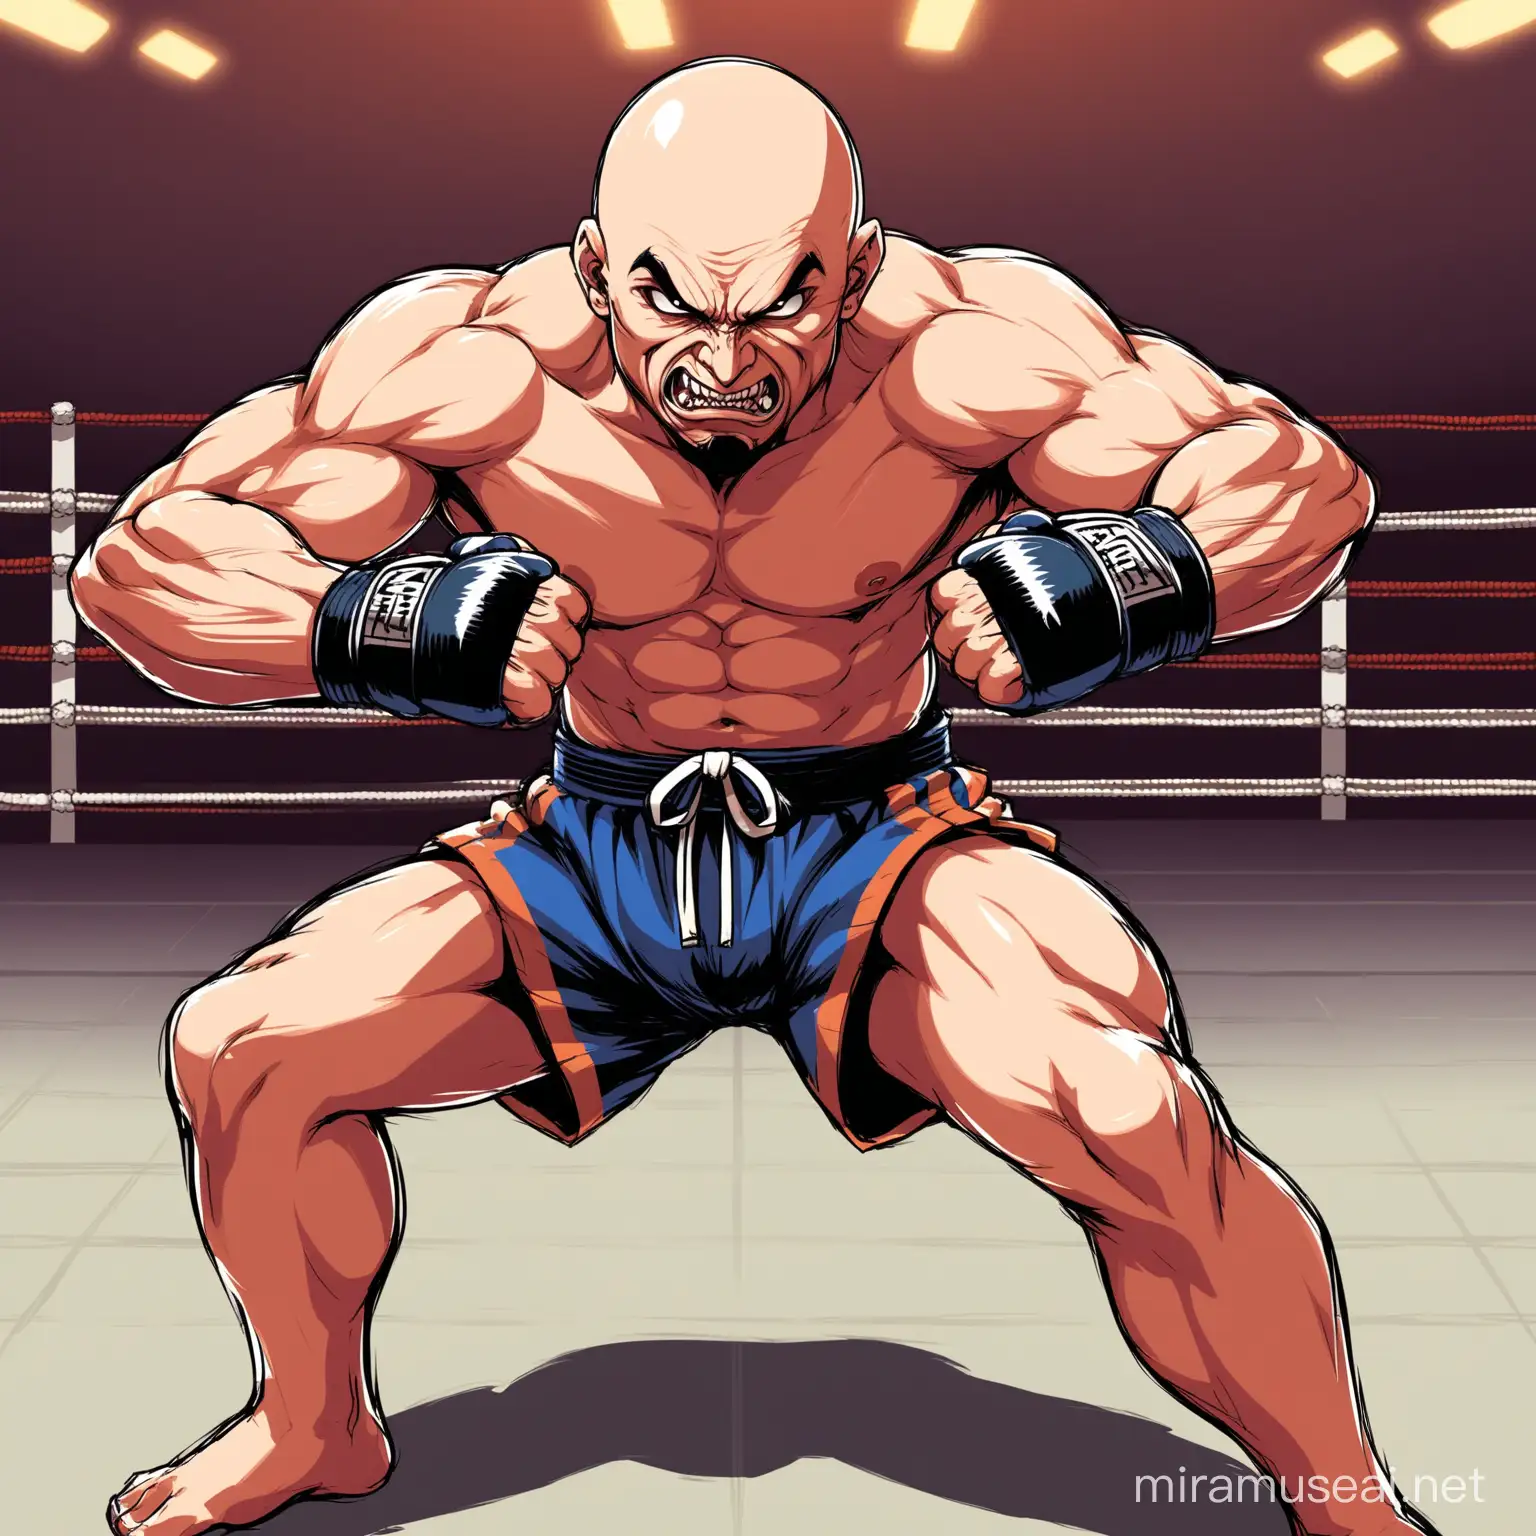 Intimidating Bald Street Fighter in Aggressive Muay Thai Stance Vector Illustration